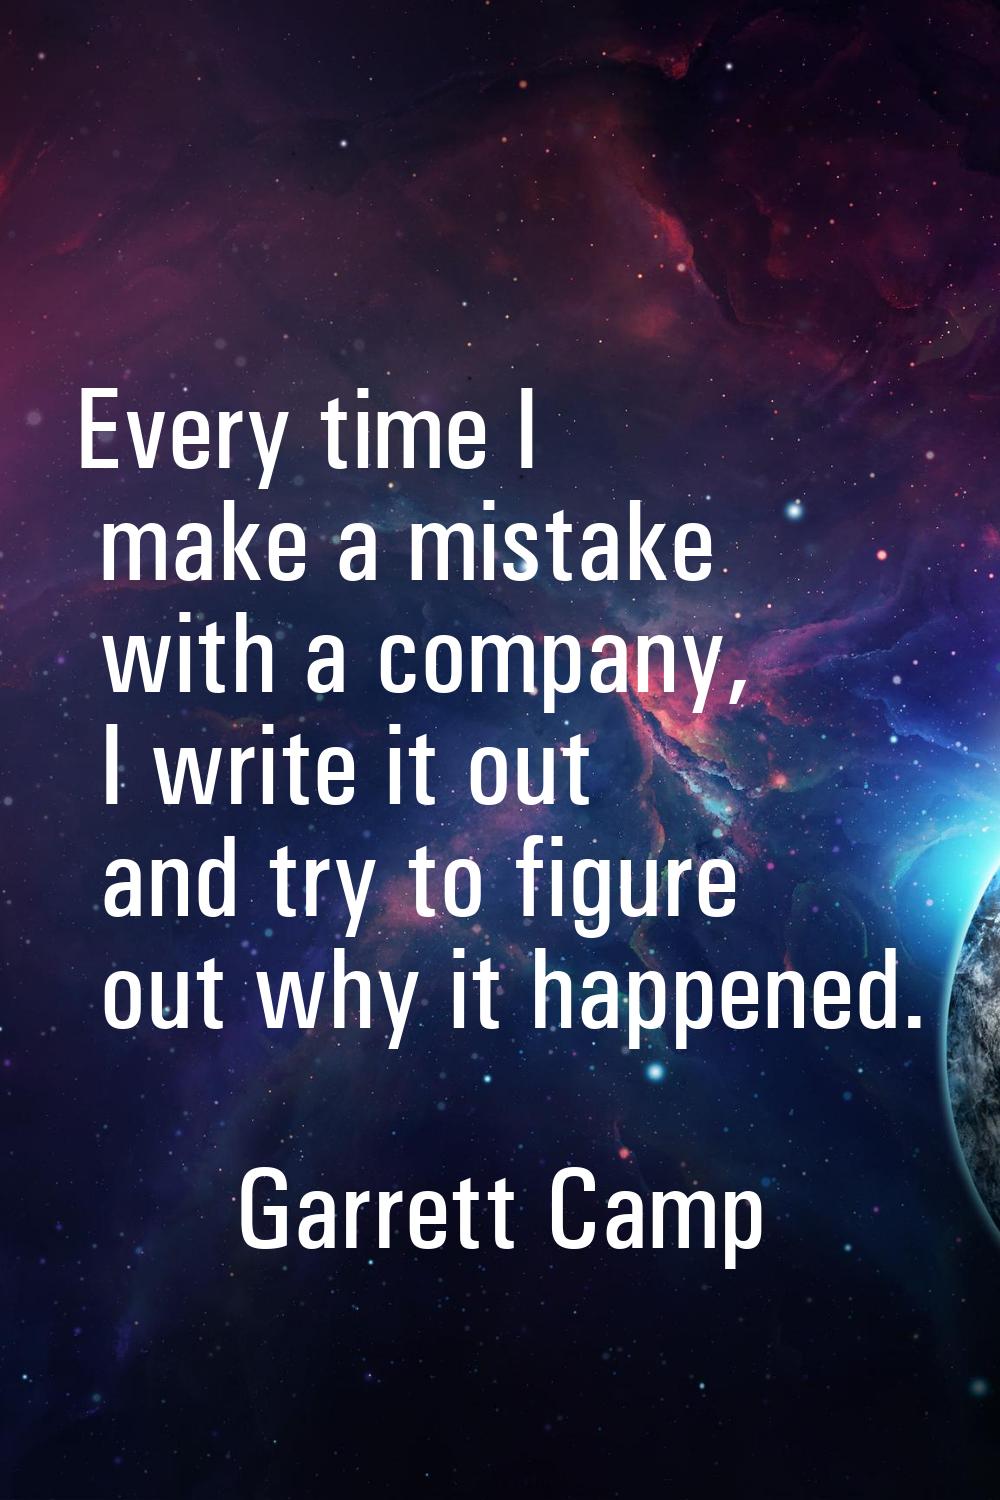 Every time I make a mistake with a company, I write it out and try to figure out why it happened.